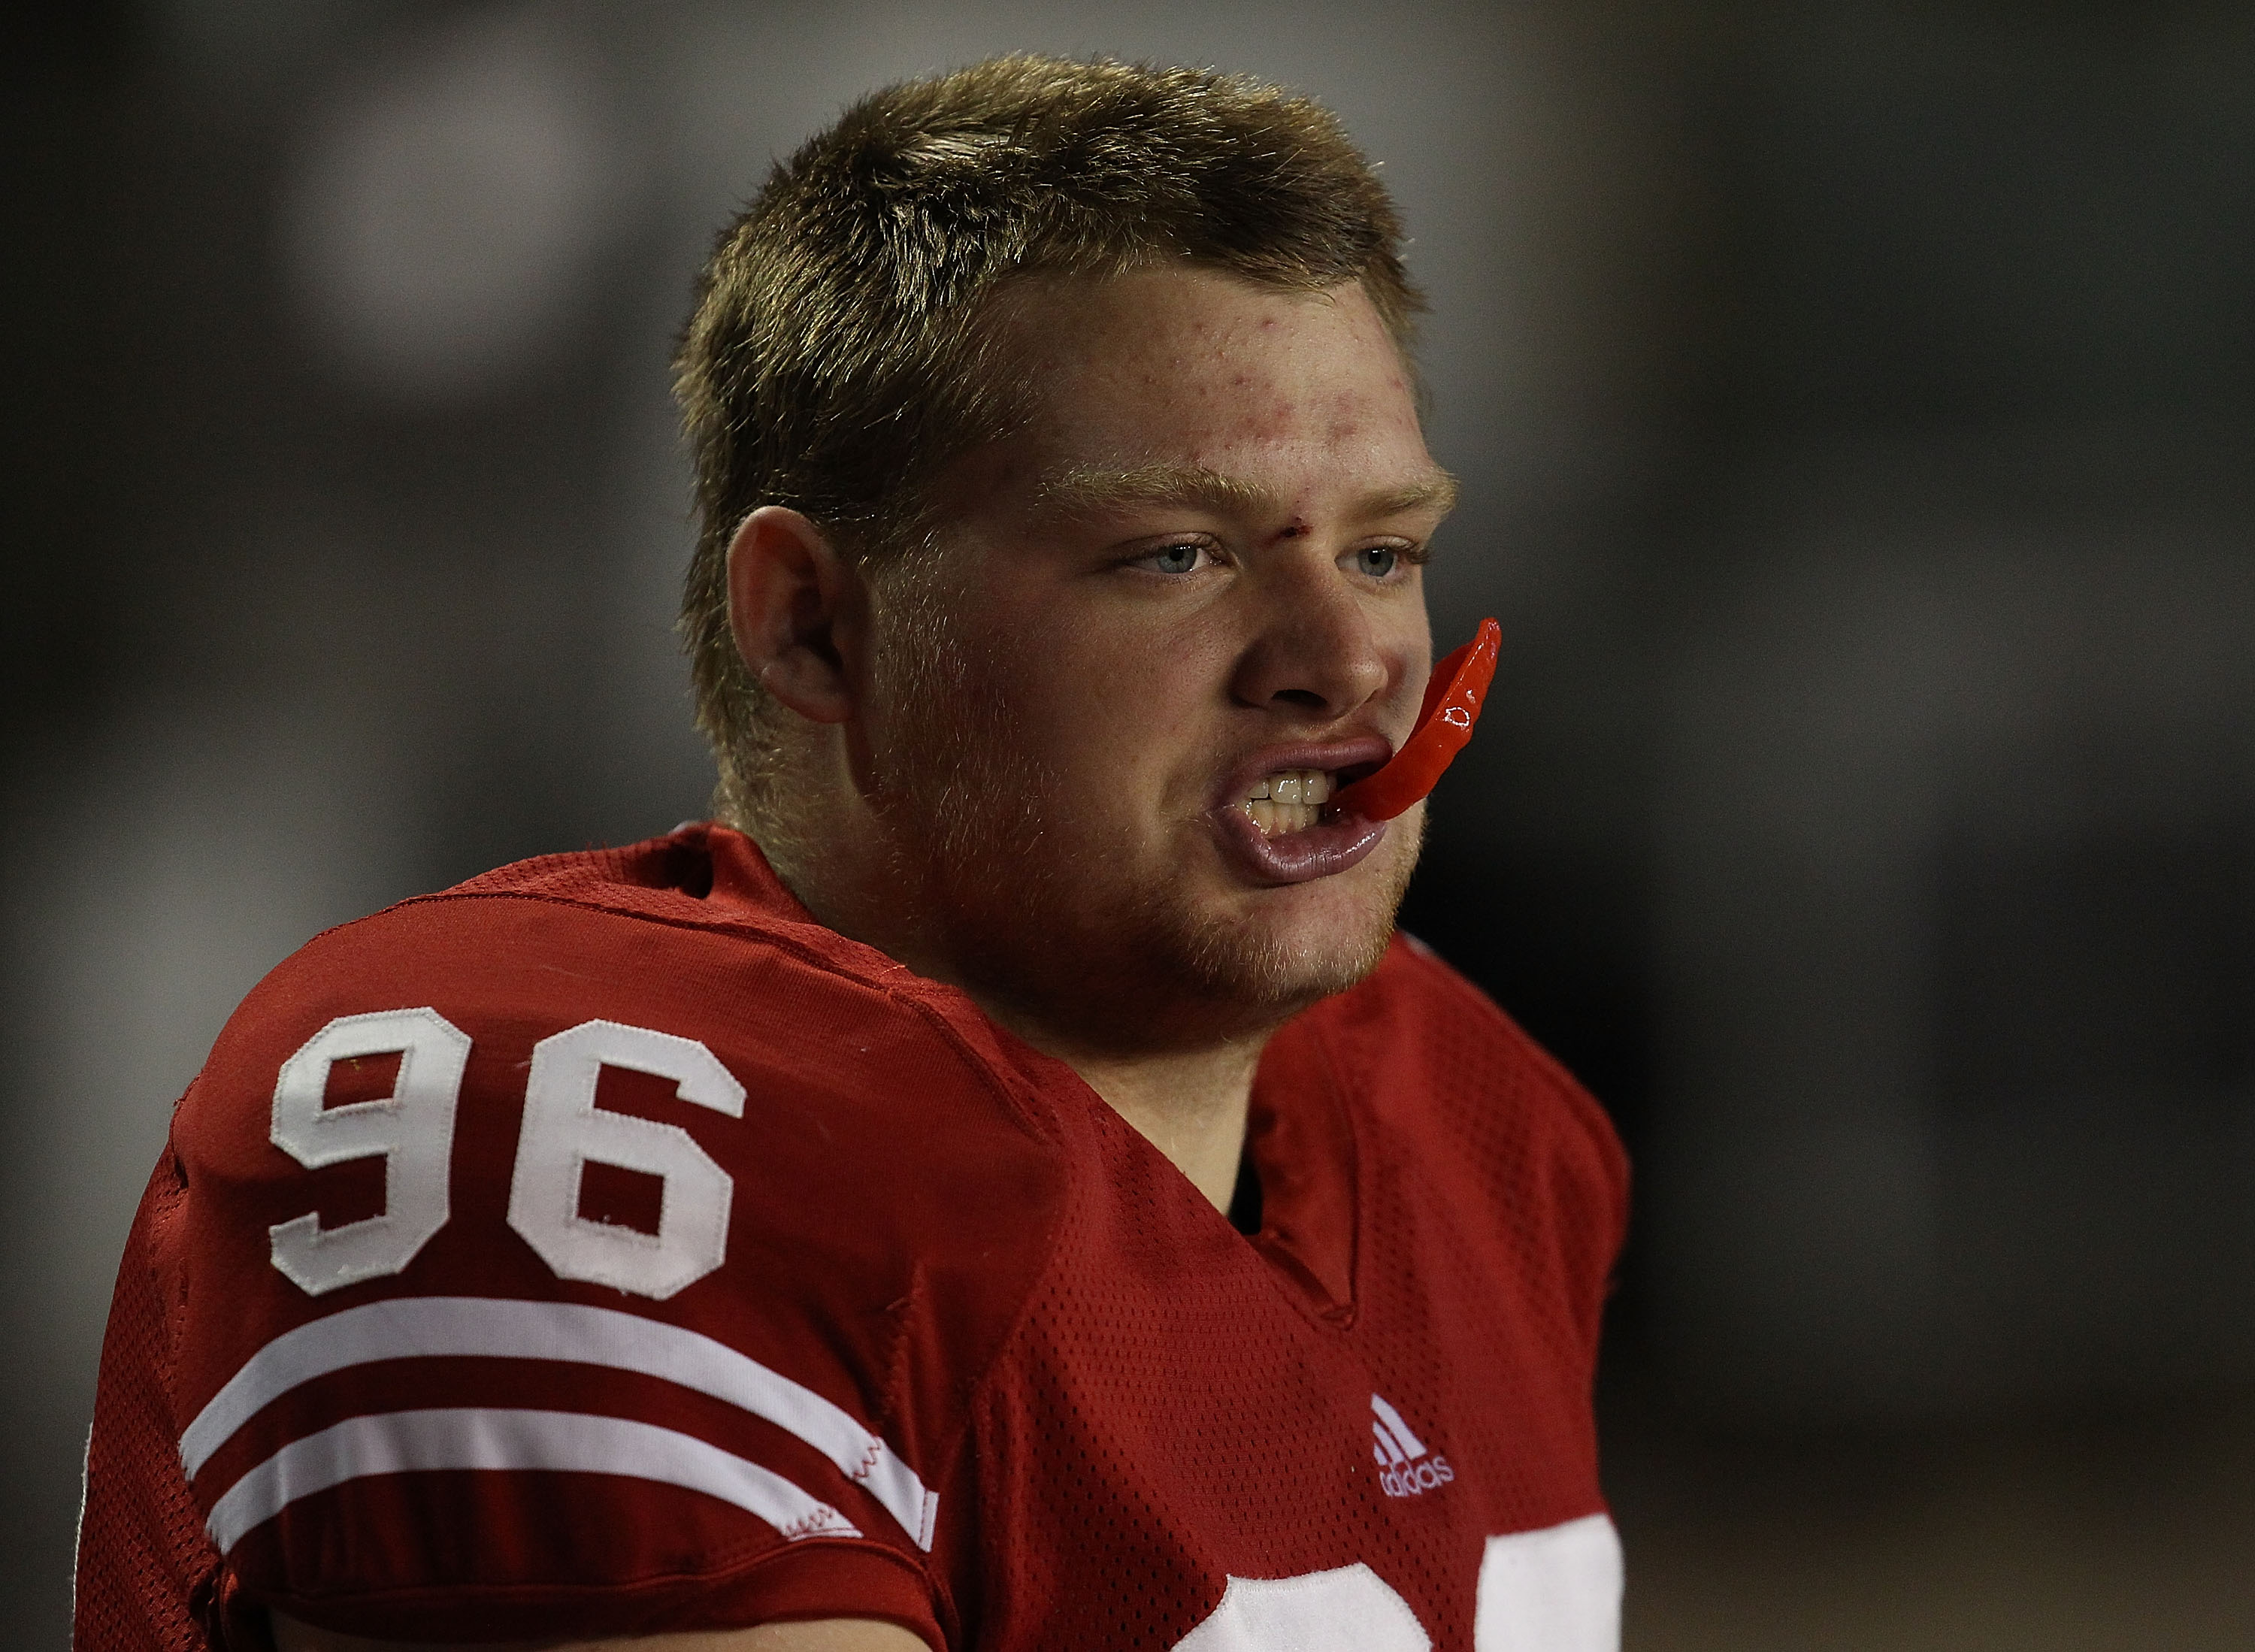 MADISON, WI - OCTOBER 16: Beau Allen #96 of the Wisconsin Badgers rests on the bench during a game against the Ohio State Buckeyes at Camp Randall Stadium on October 16, 2010 in Madison, Wisconsin. Wisconsin defeated Ohio State 31-18. (Photo by Jonathan D